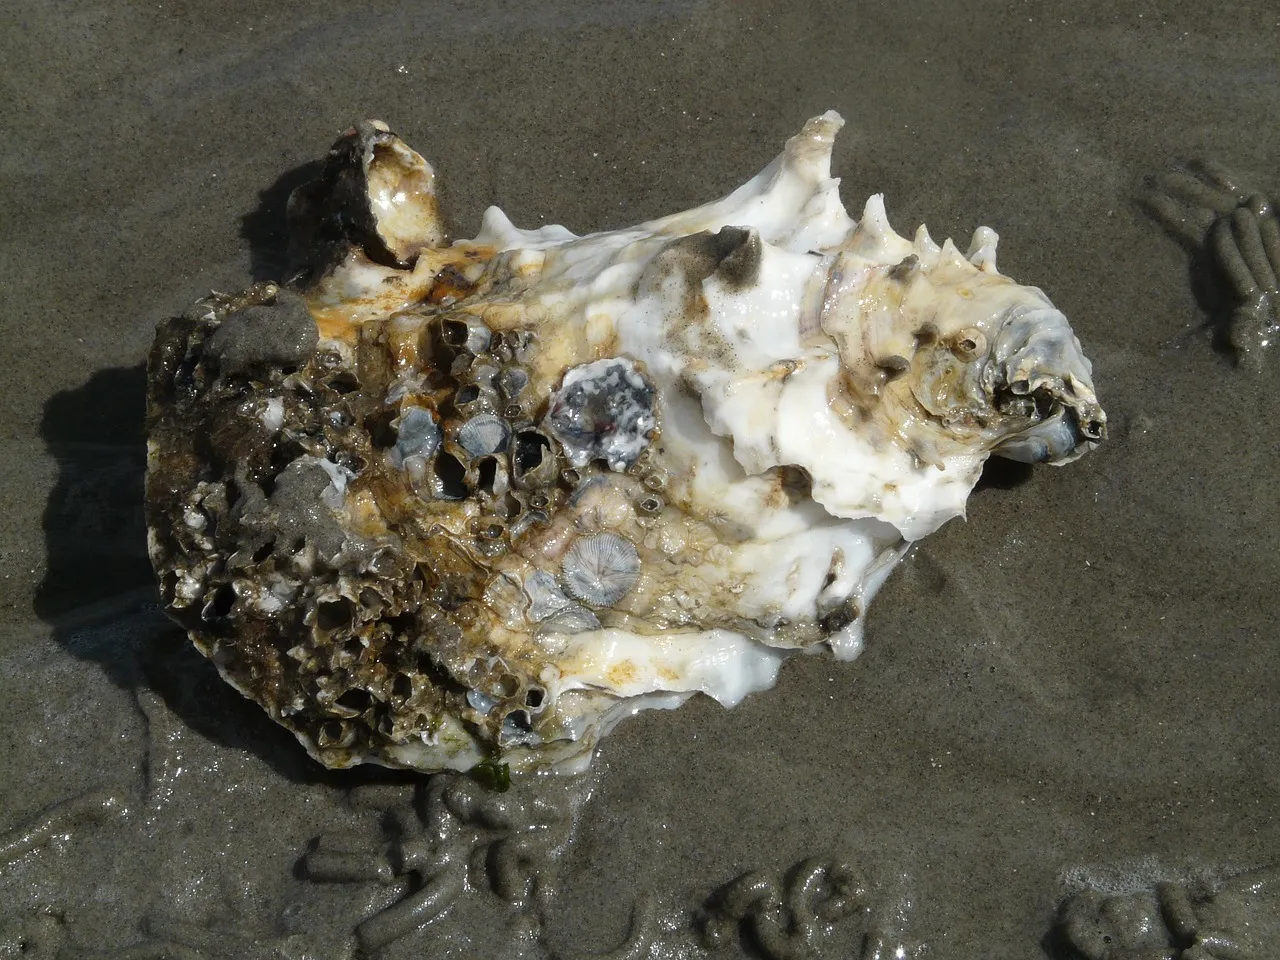 A Pacific oyster